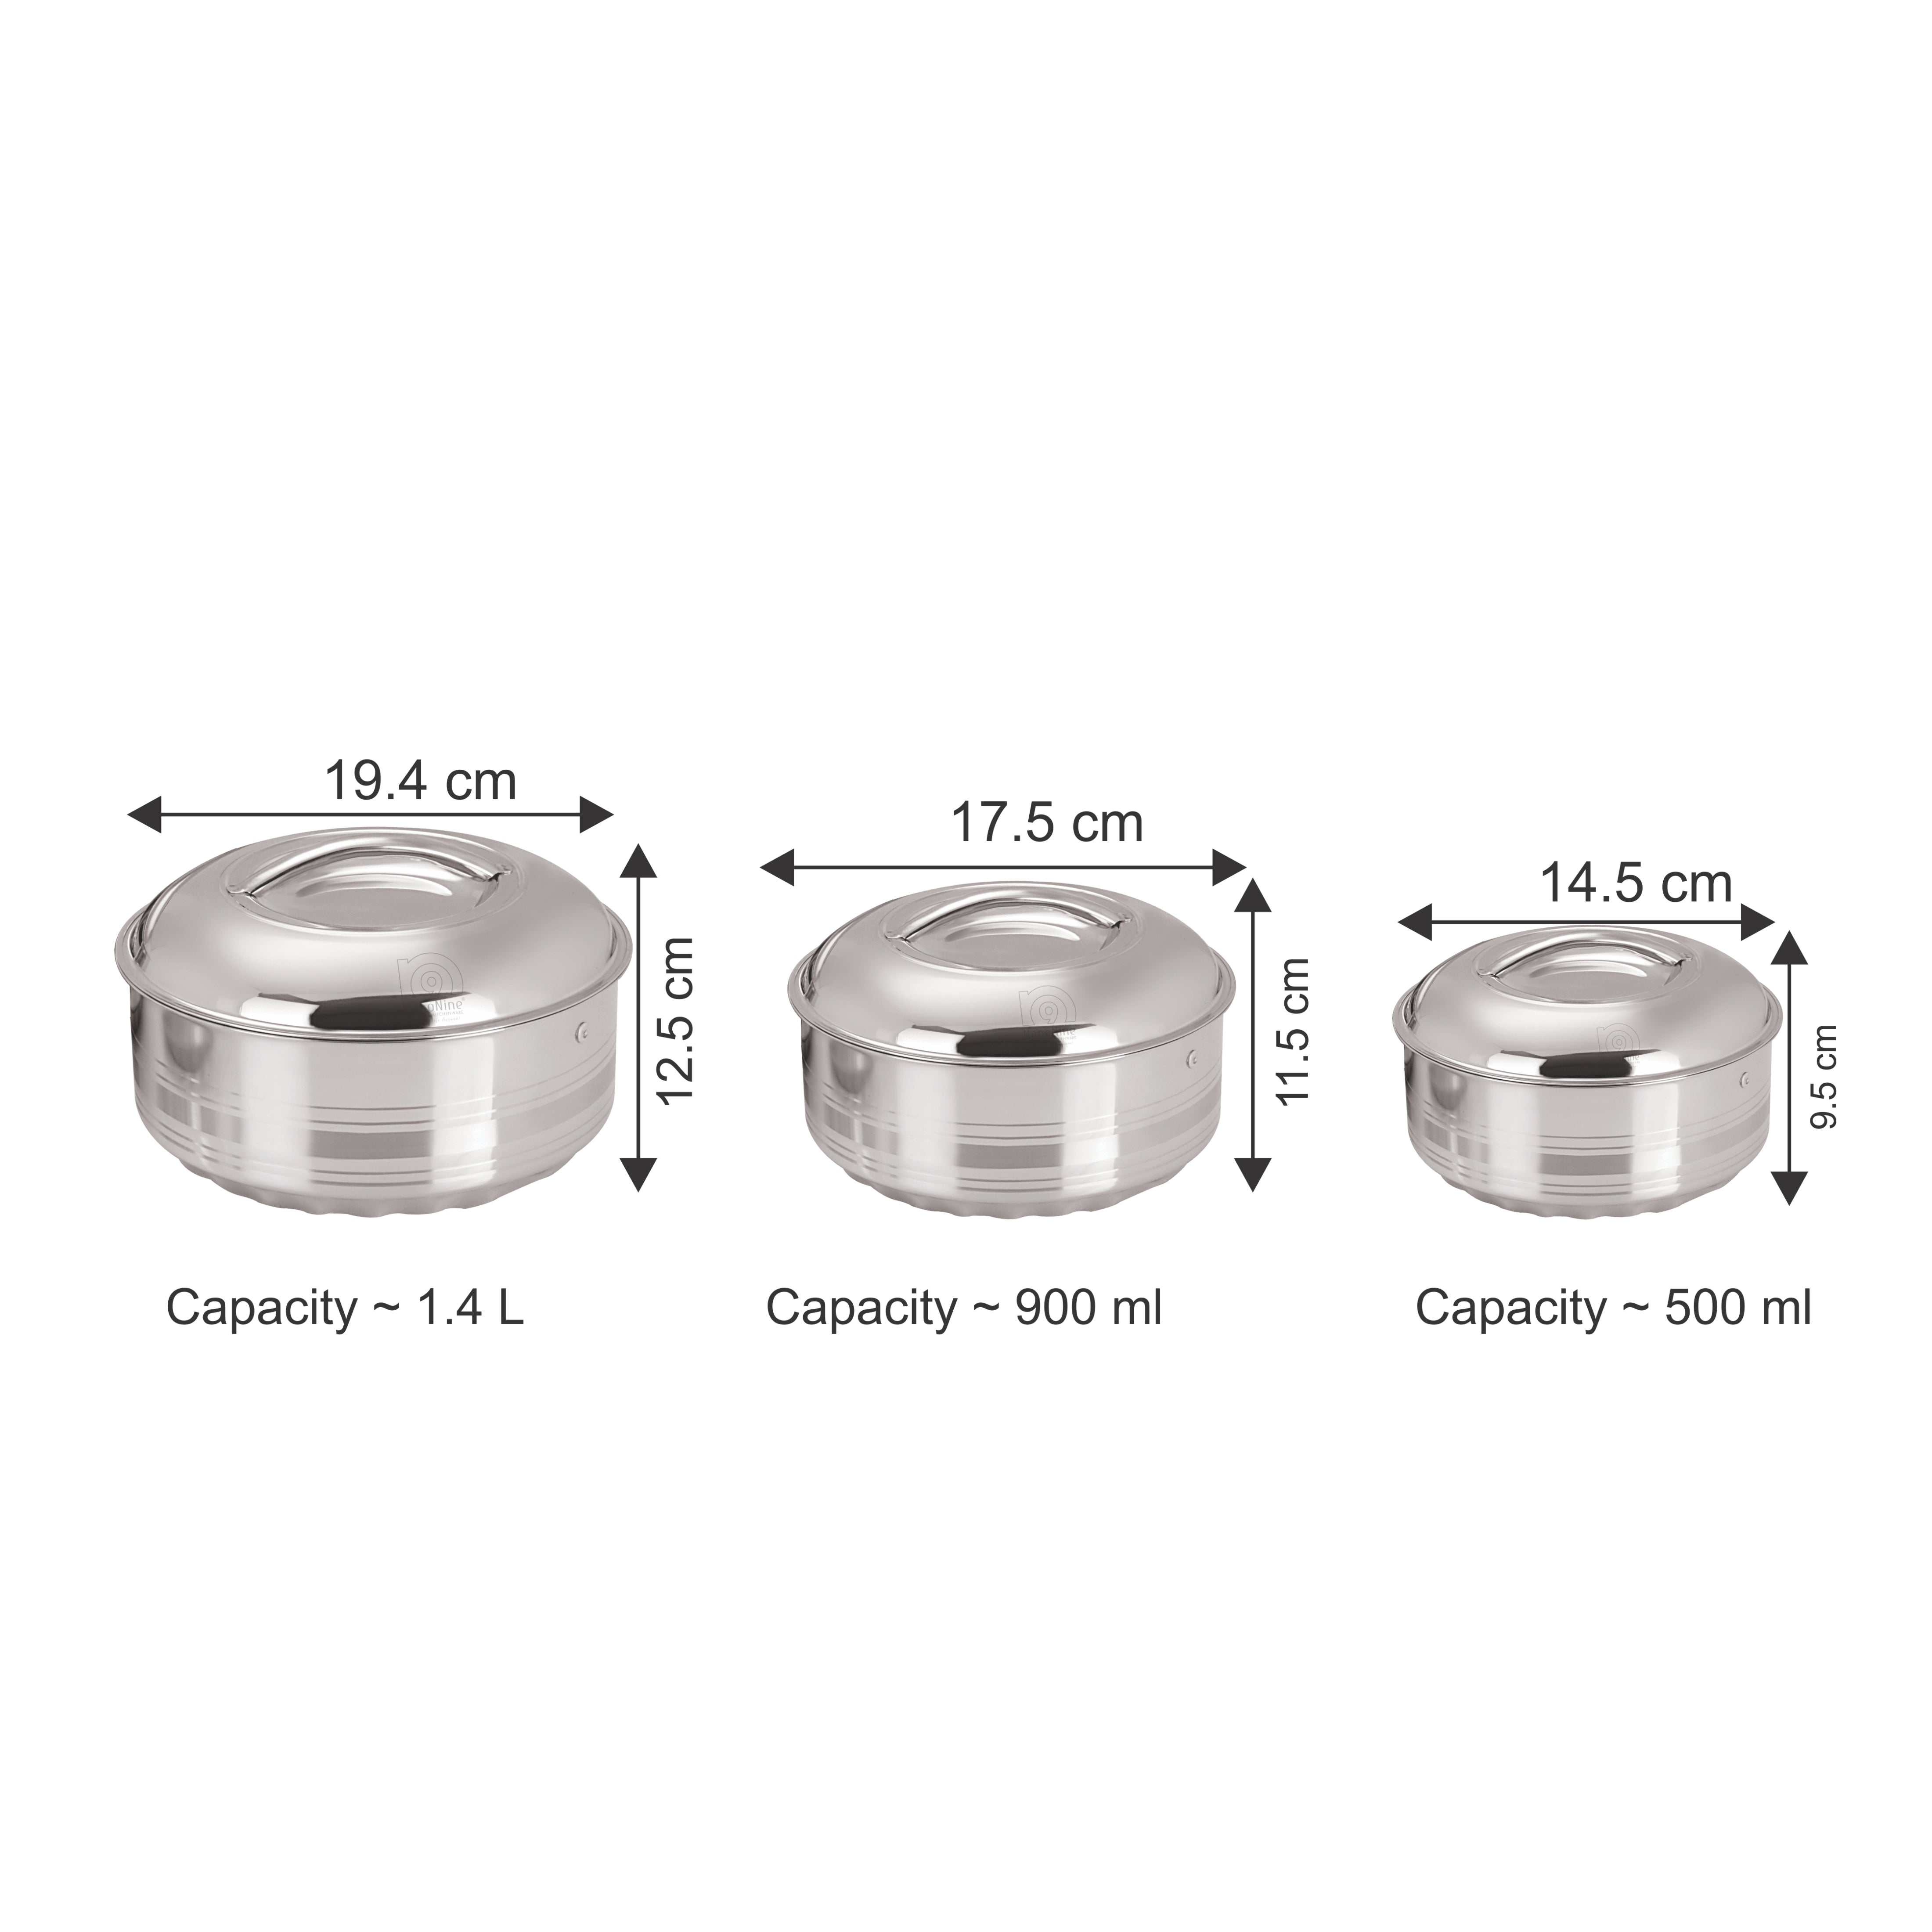 NanoNine Hot Shine 0.5 L + 0.9 L + 1.4 L Double Wall Insulated Hot Pot Stainless- Steel Casserole Set with Steel Lid.